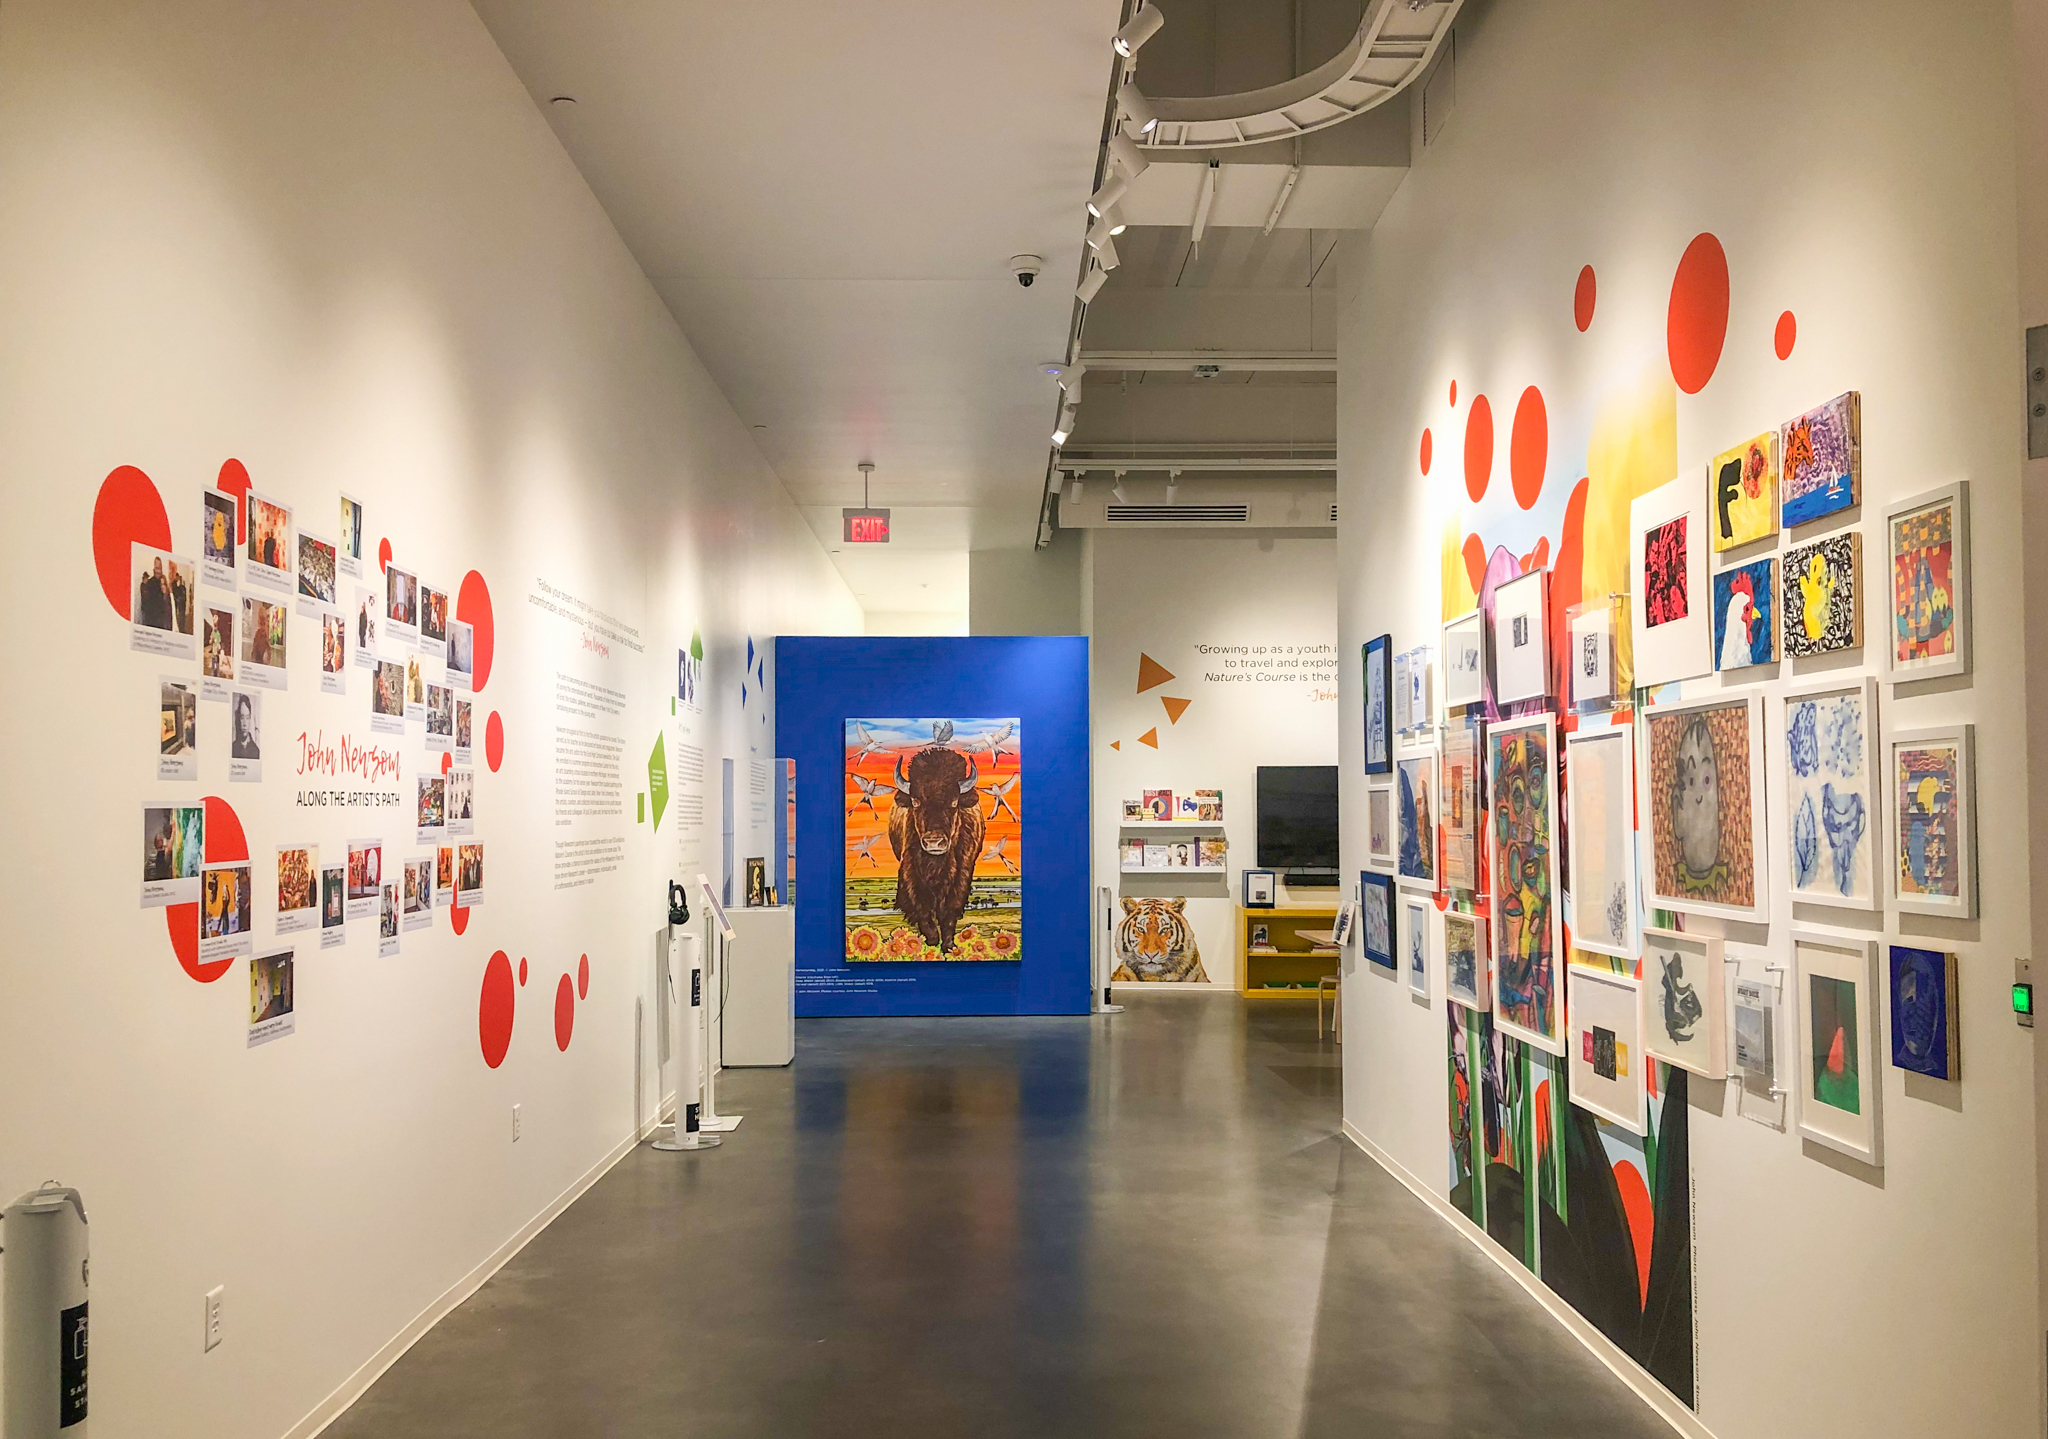 It is a wide shot of the Learning Gallery. On the left, a collage wall of photos backed by bright red circles. On the right, a salon wall of framed paintings and pictures of varying sizes. Straight ahead, a mural of a bison facing forward on a blue wall